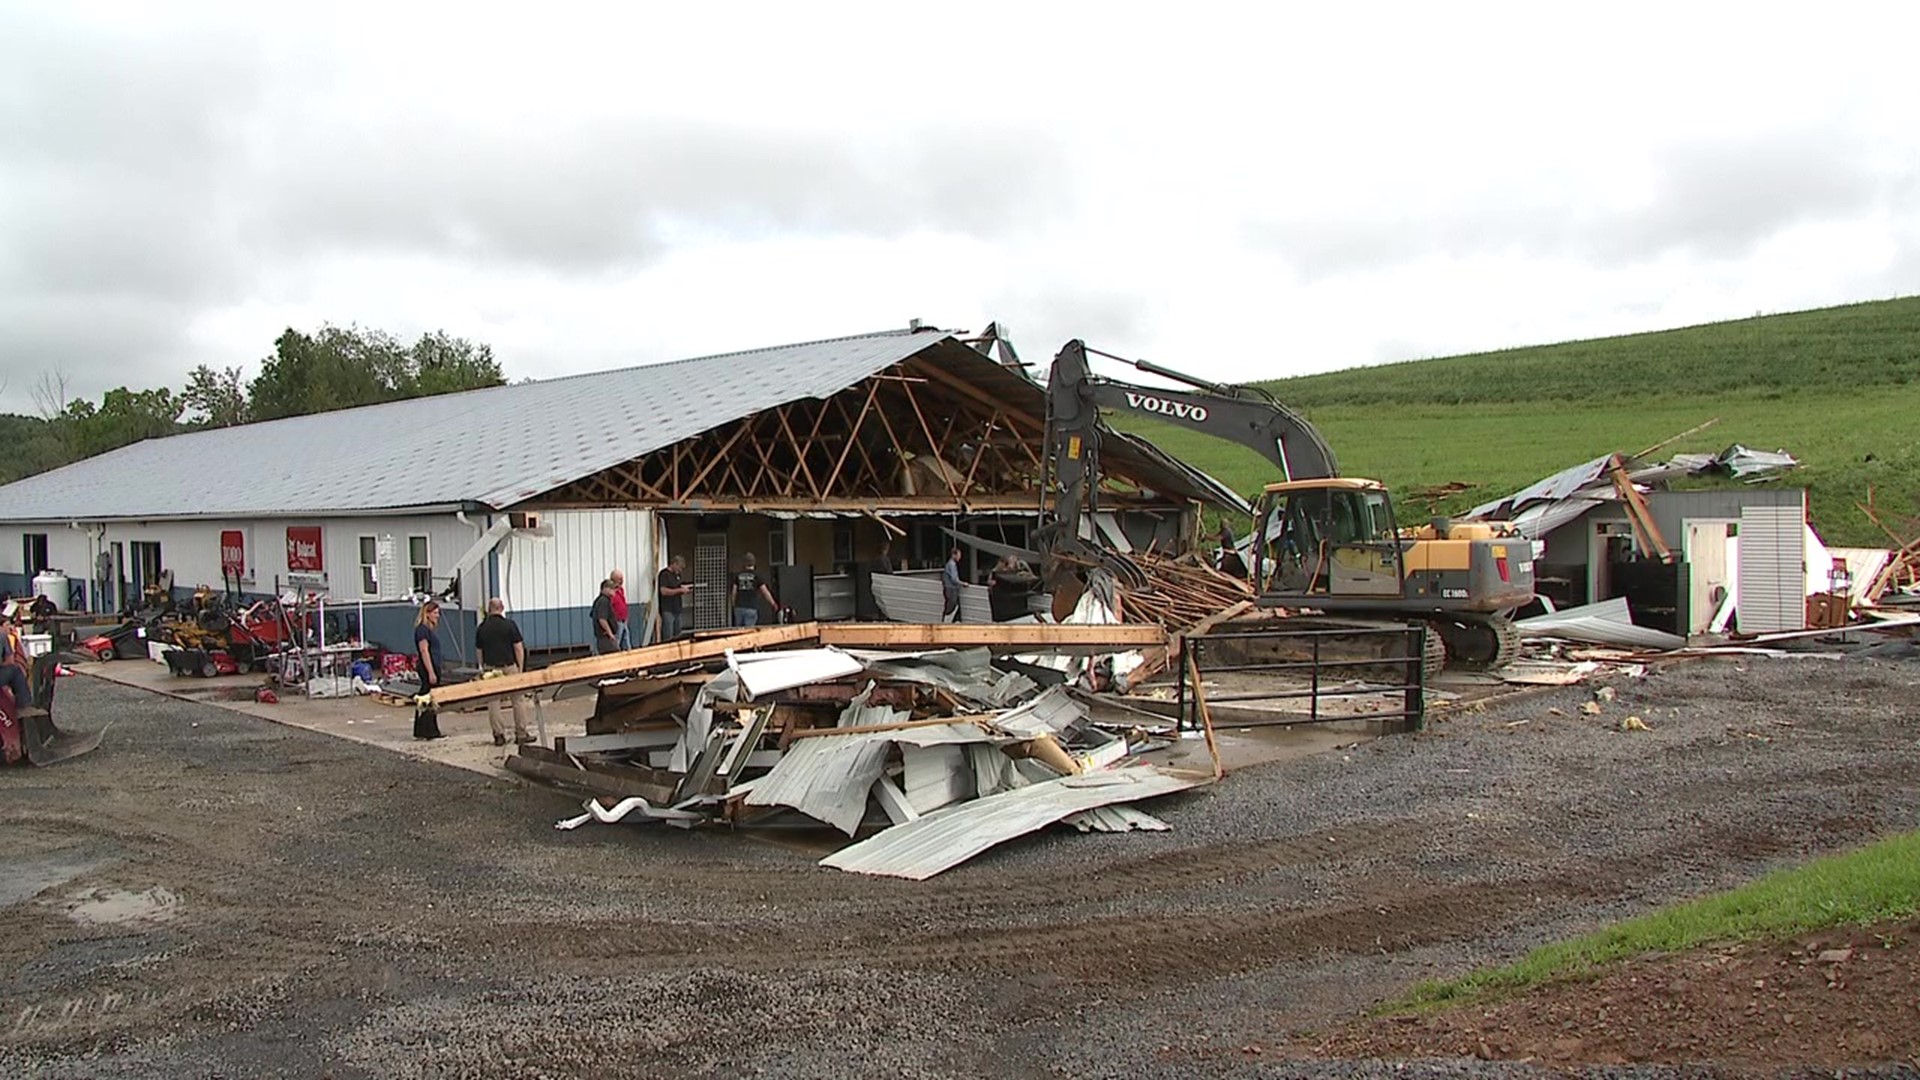 In the blink of an eye, a lawn care business near Elysburg saw its showroom destroyed.